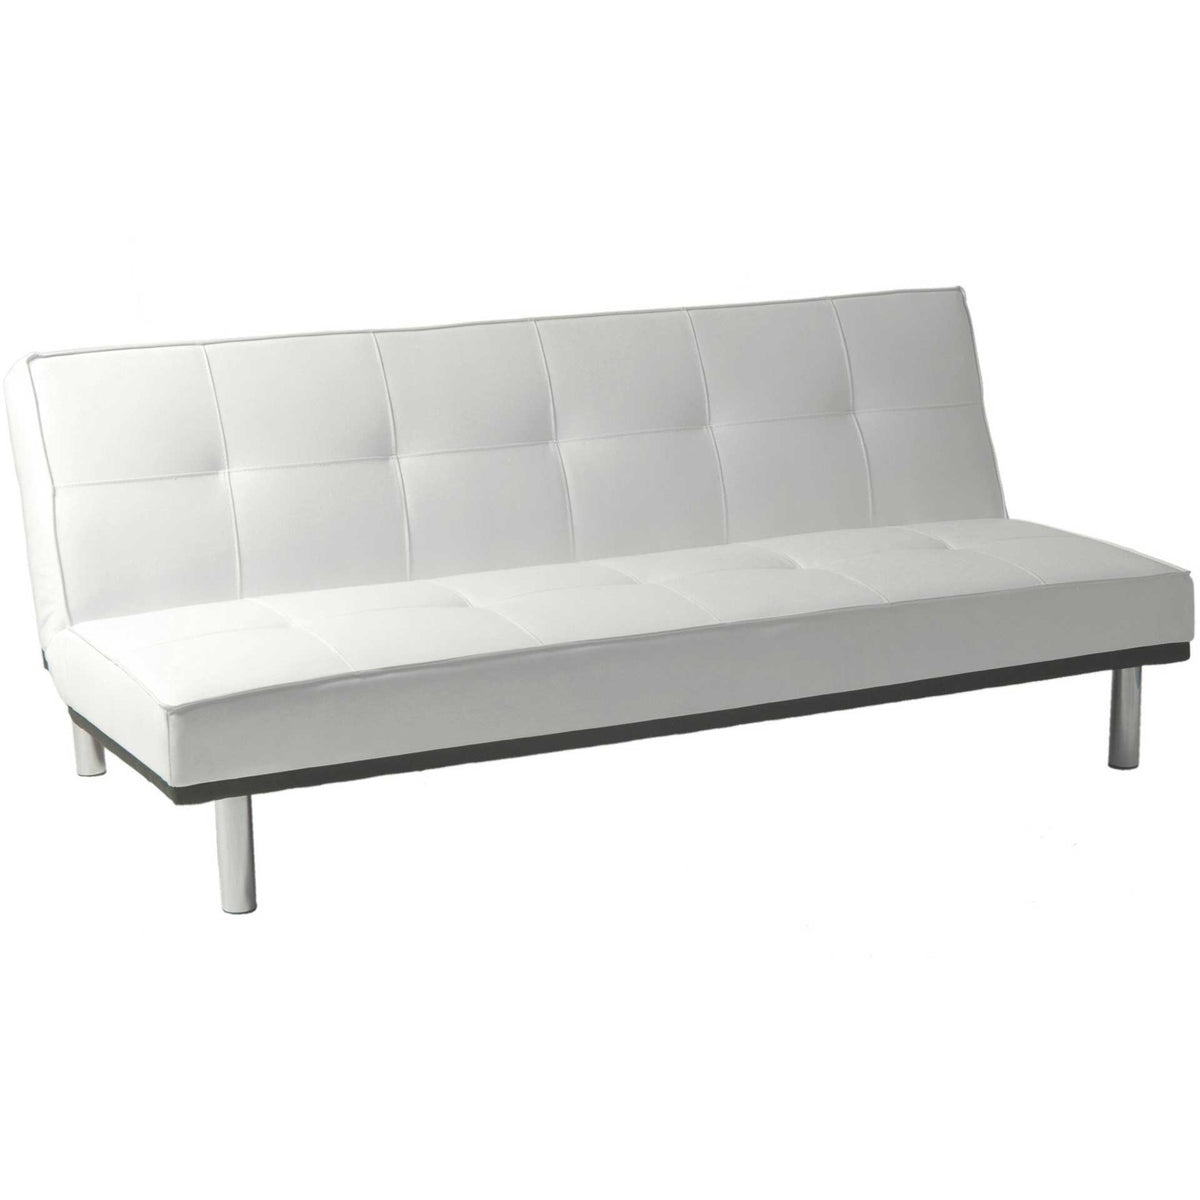 Sev Sofa Bed White Leatherette/Stainless Steel